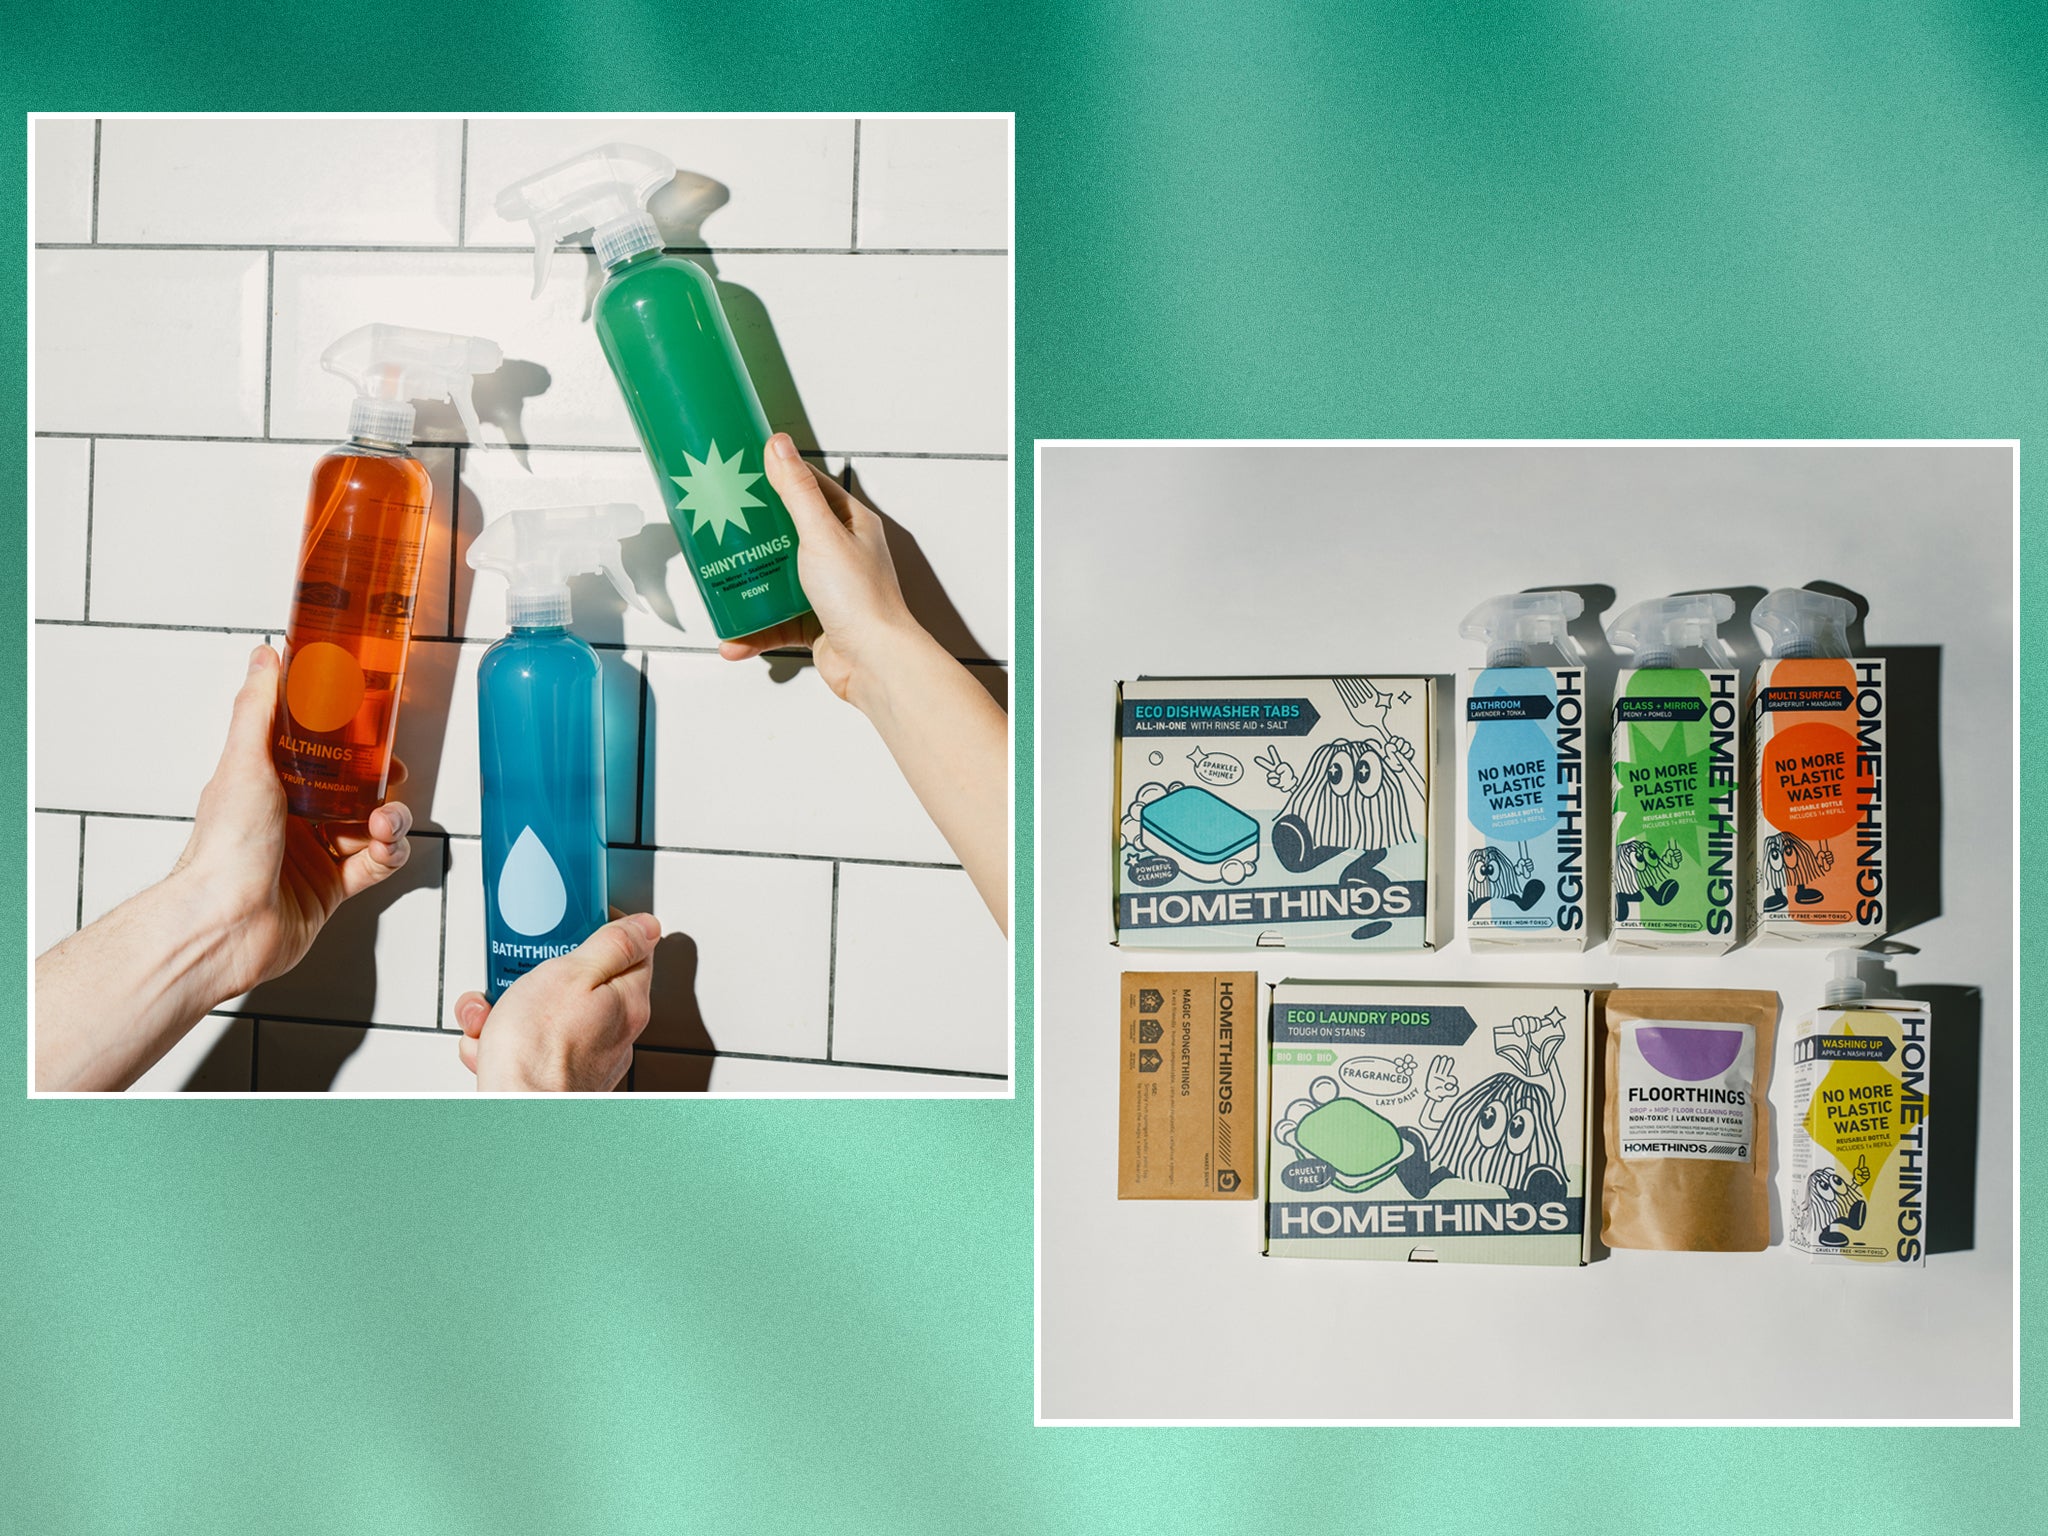 Homethings review: How does this eco-friendly cleaning brand fare